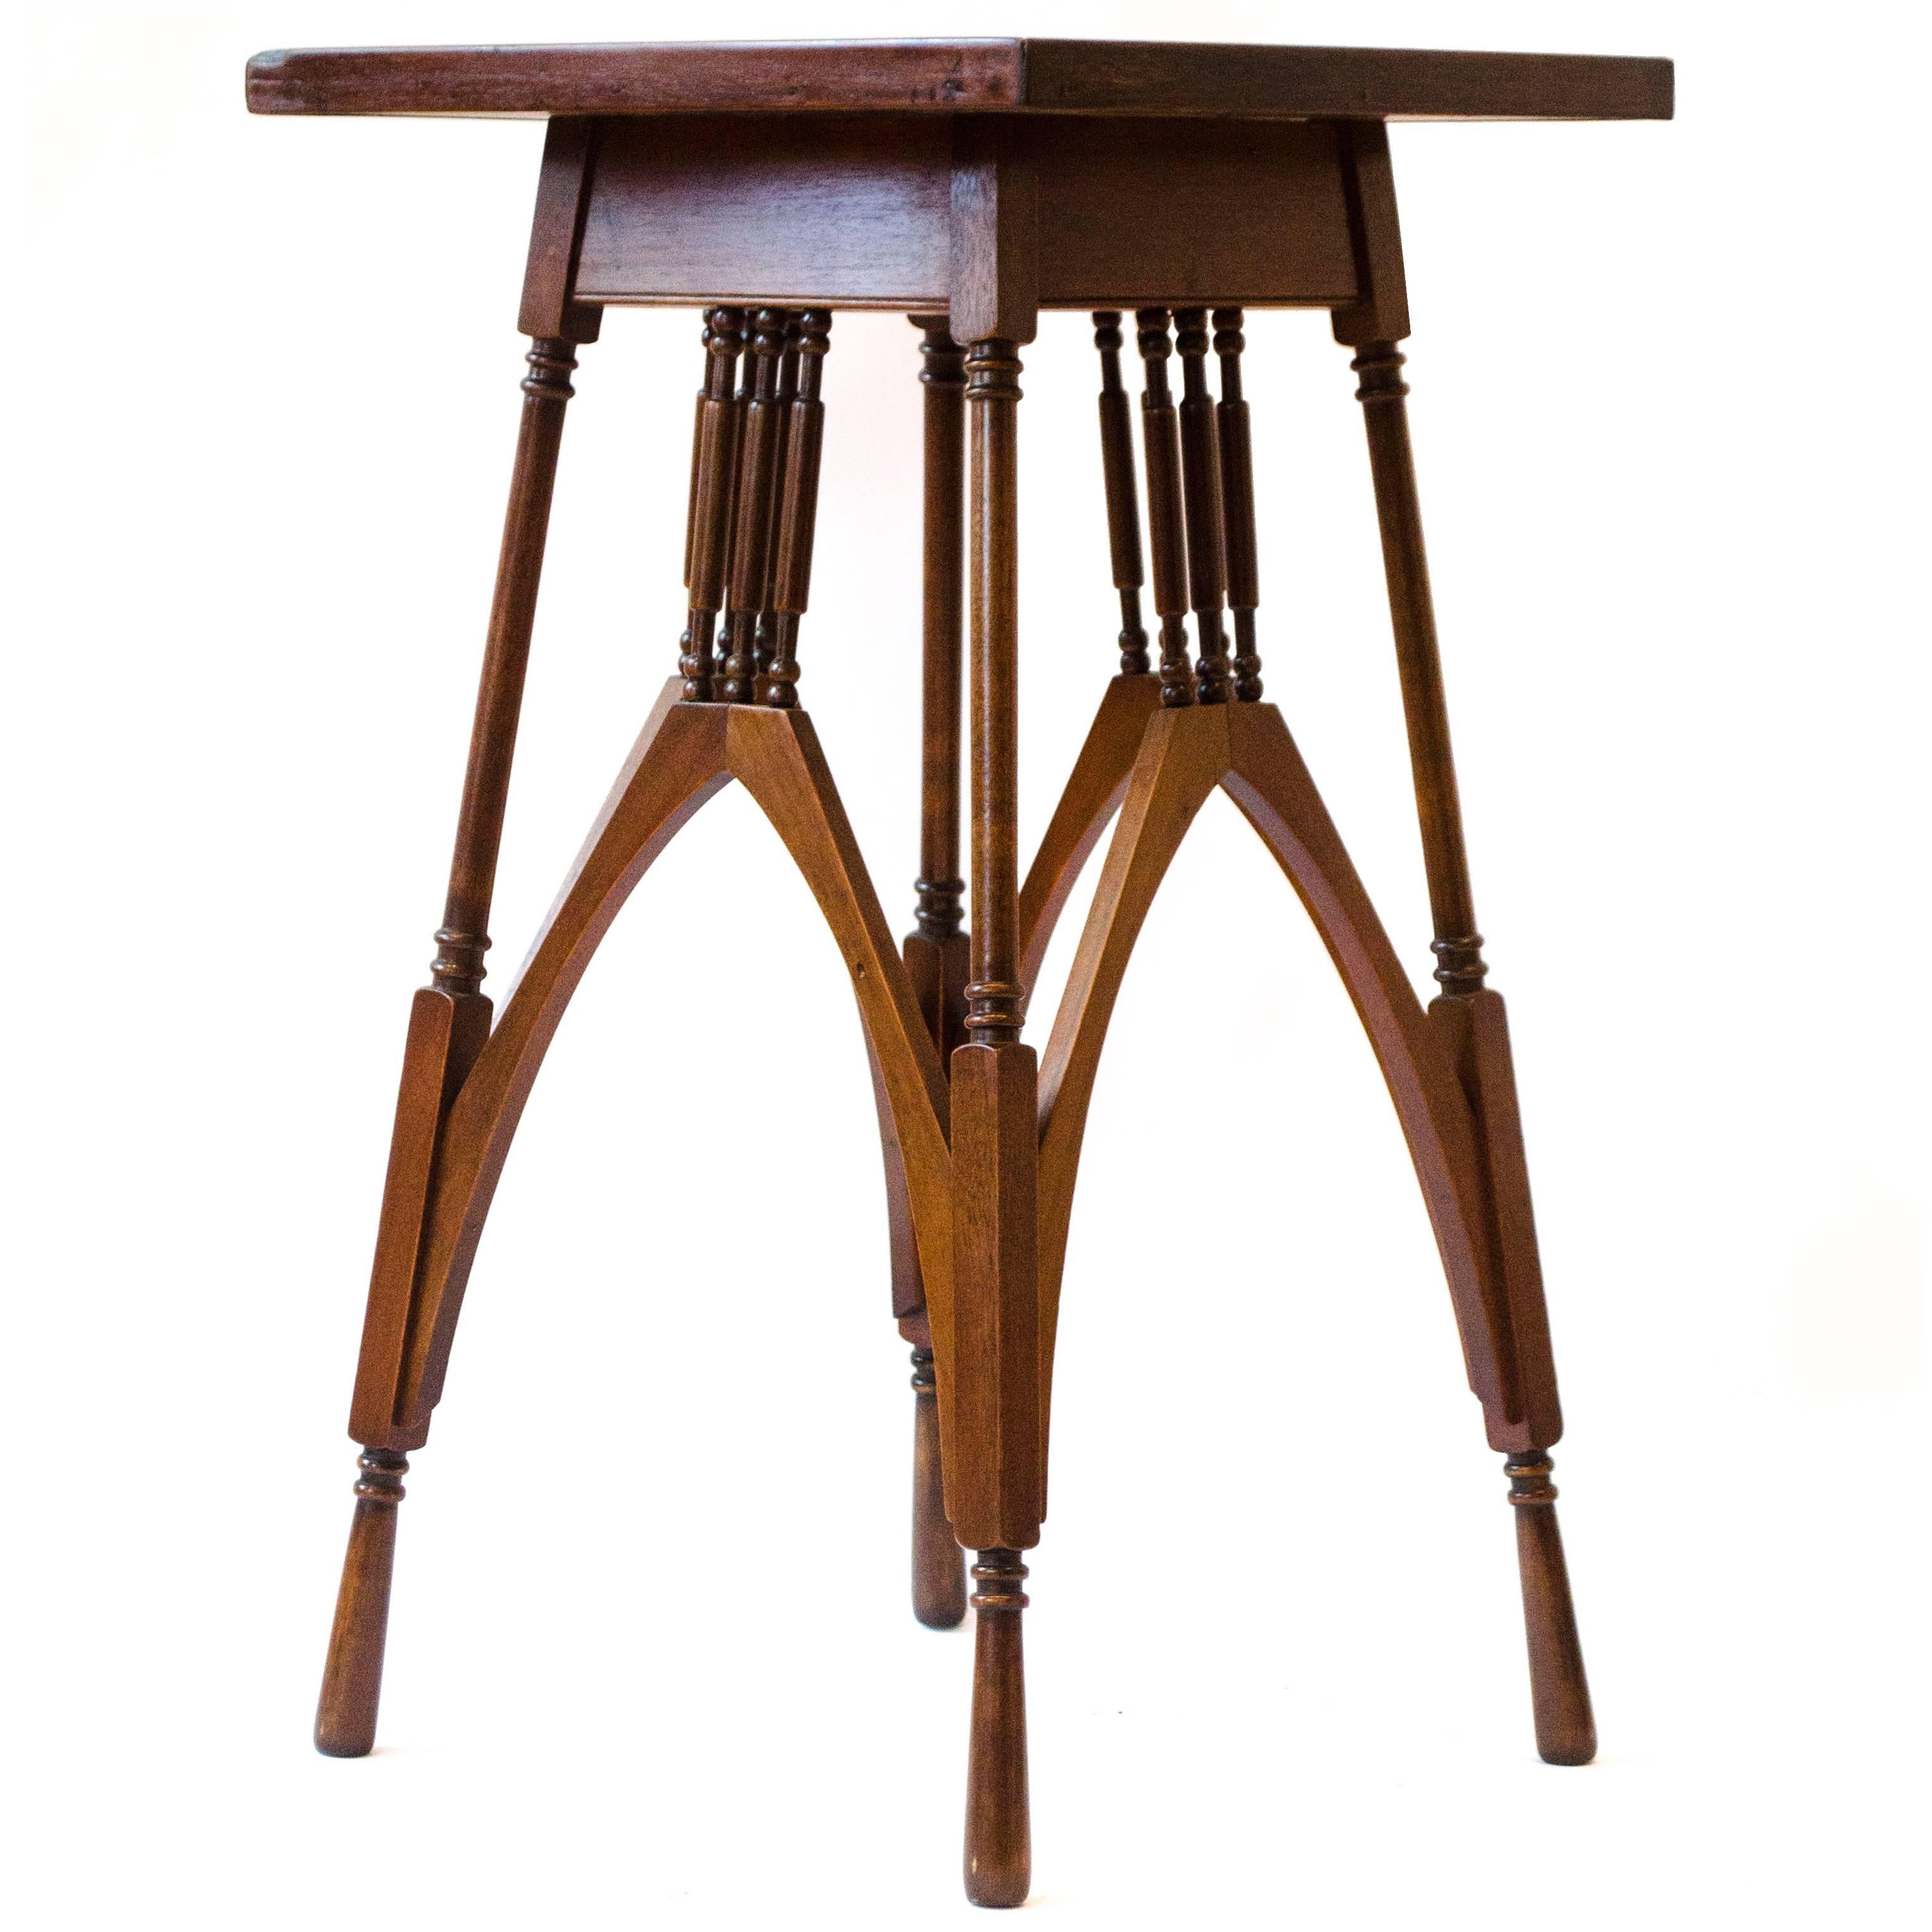  M H Baillie Scott for The Guild Of Handicraft A Rosewood & Mahogany Side Table